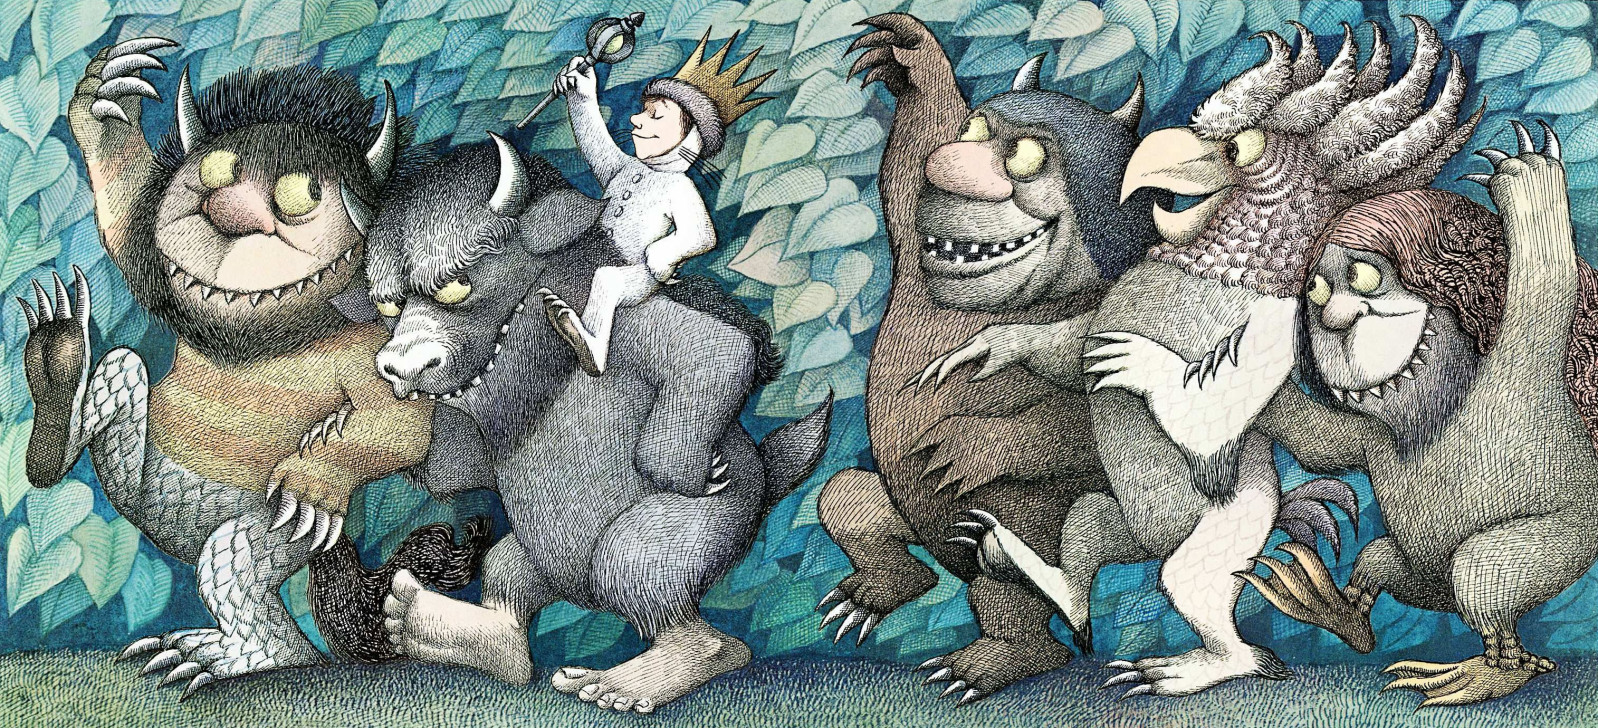 Back to the Wild: Where the Wild Things Are sequel